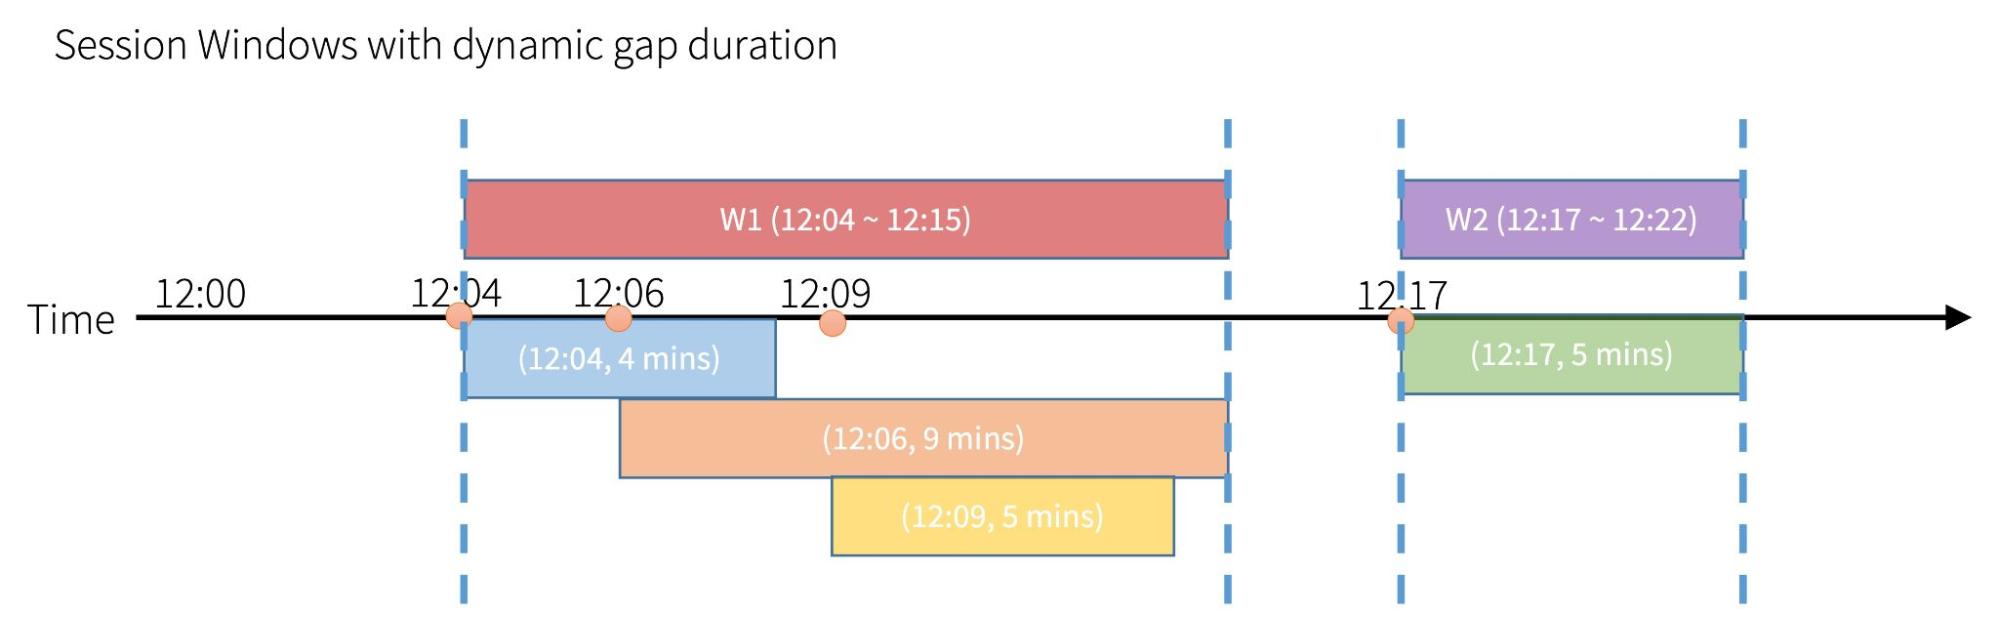 Visualized examples of session windows with dynamic gap duration in Apache Spark 3.2.